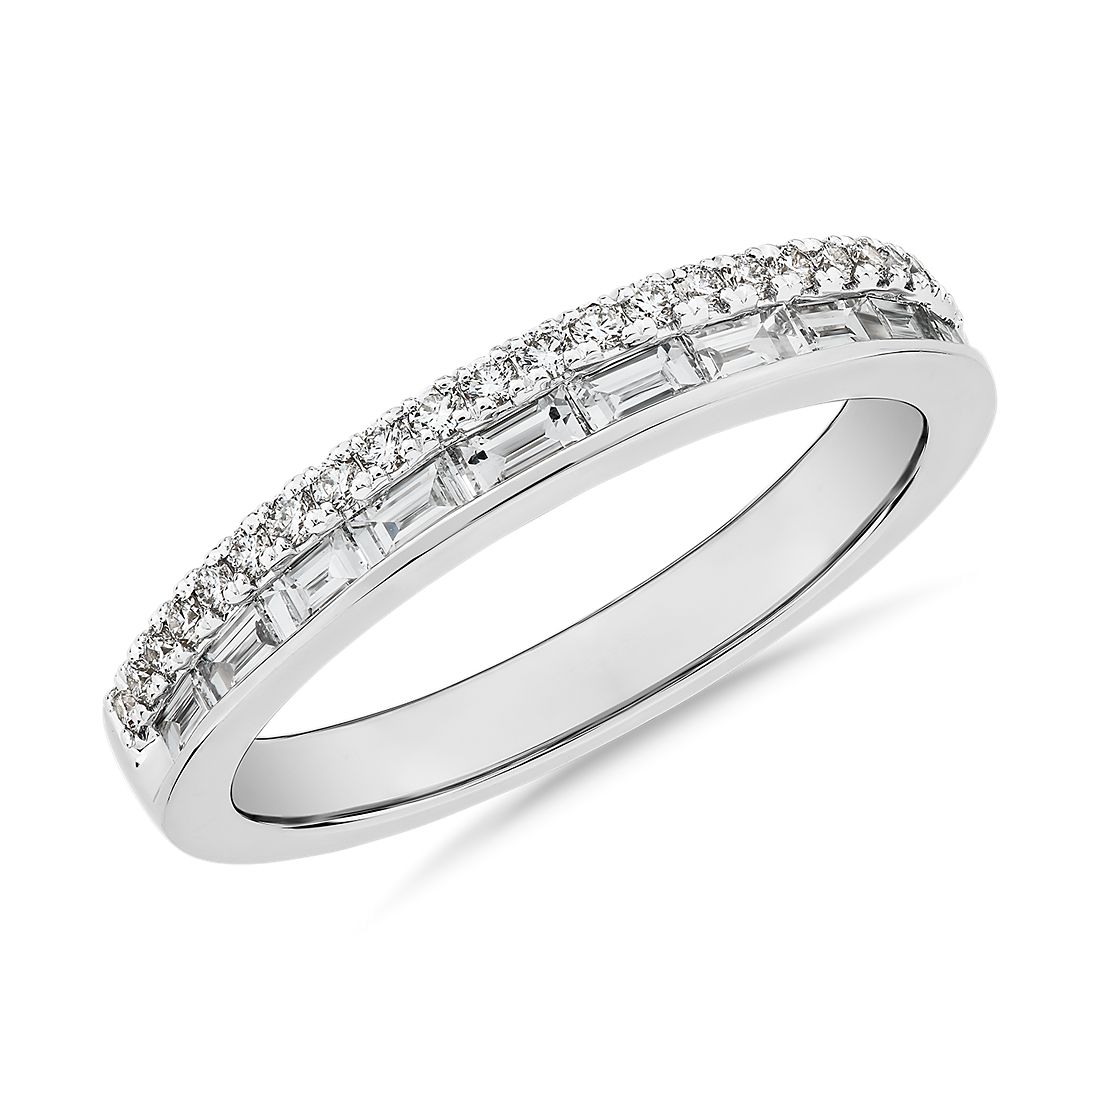 14K White Gold Plated Double Row Diamond Accent Men's Ring by Unique Design